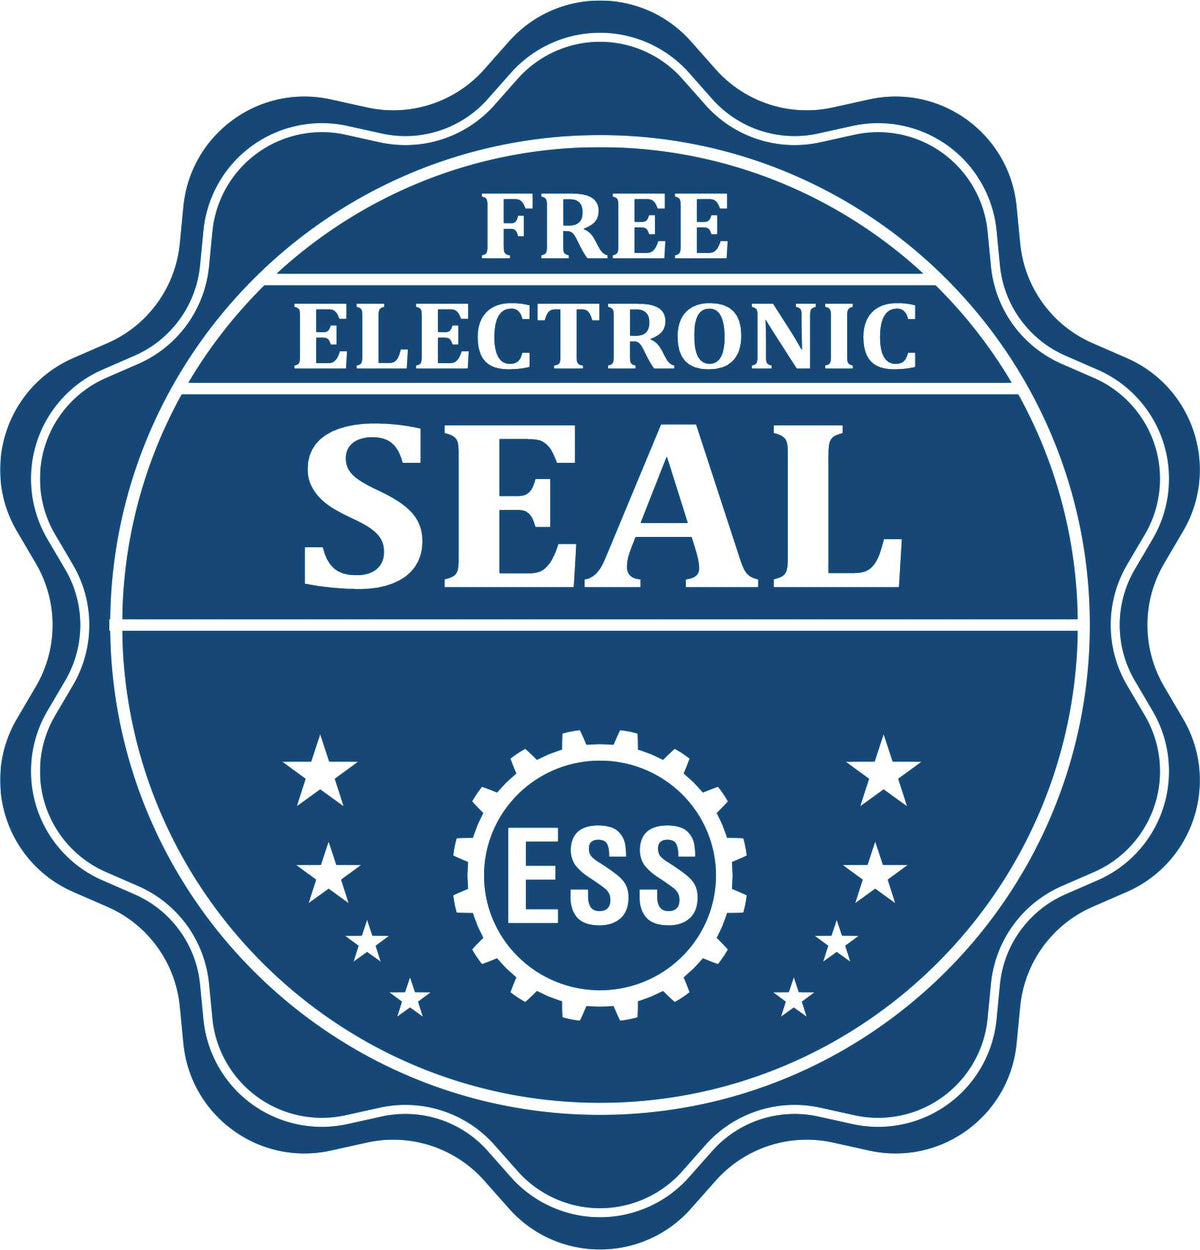 A badge showing a free electronic seal for the Premium MaxLight Pre-Inked Maine Geology Stamp with stars and the ESS gear on the emblem.